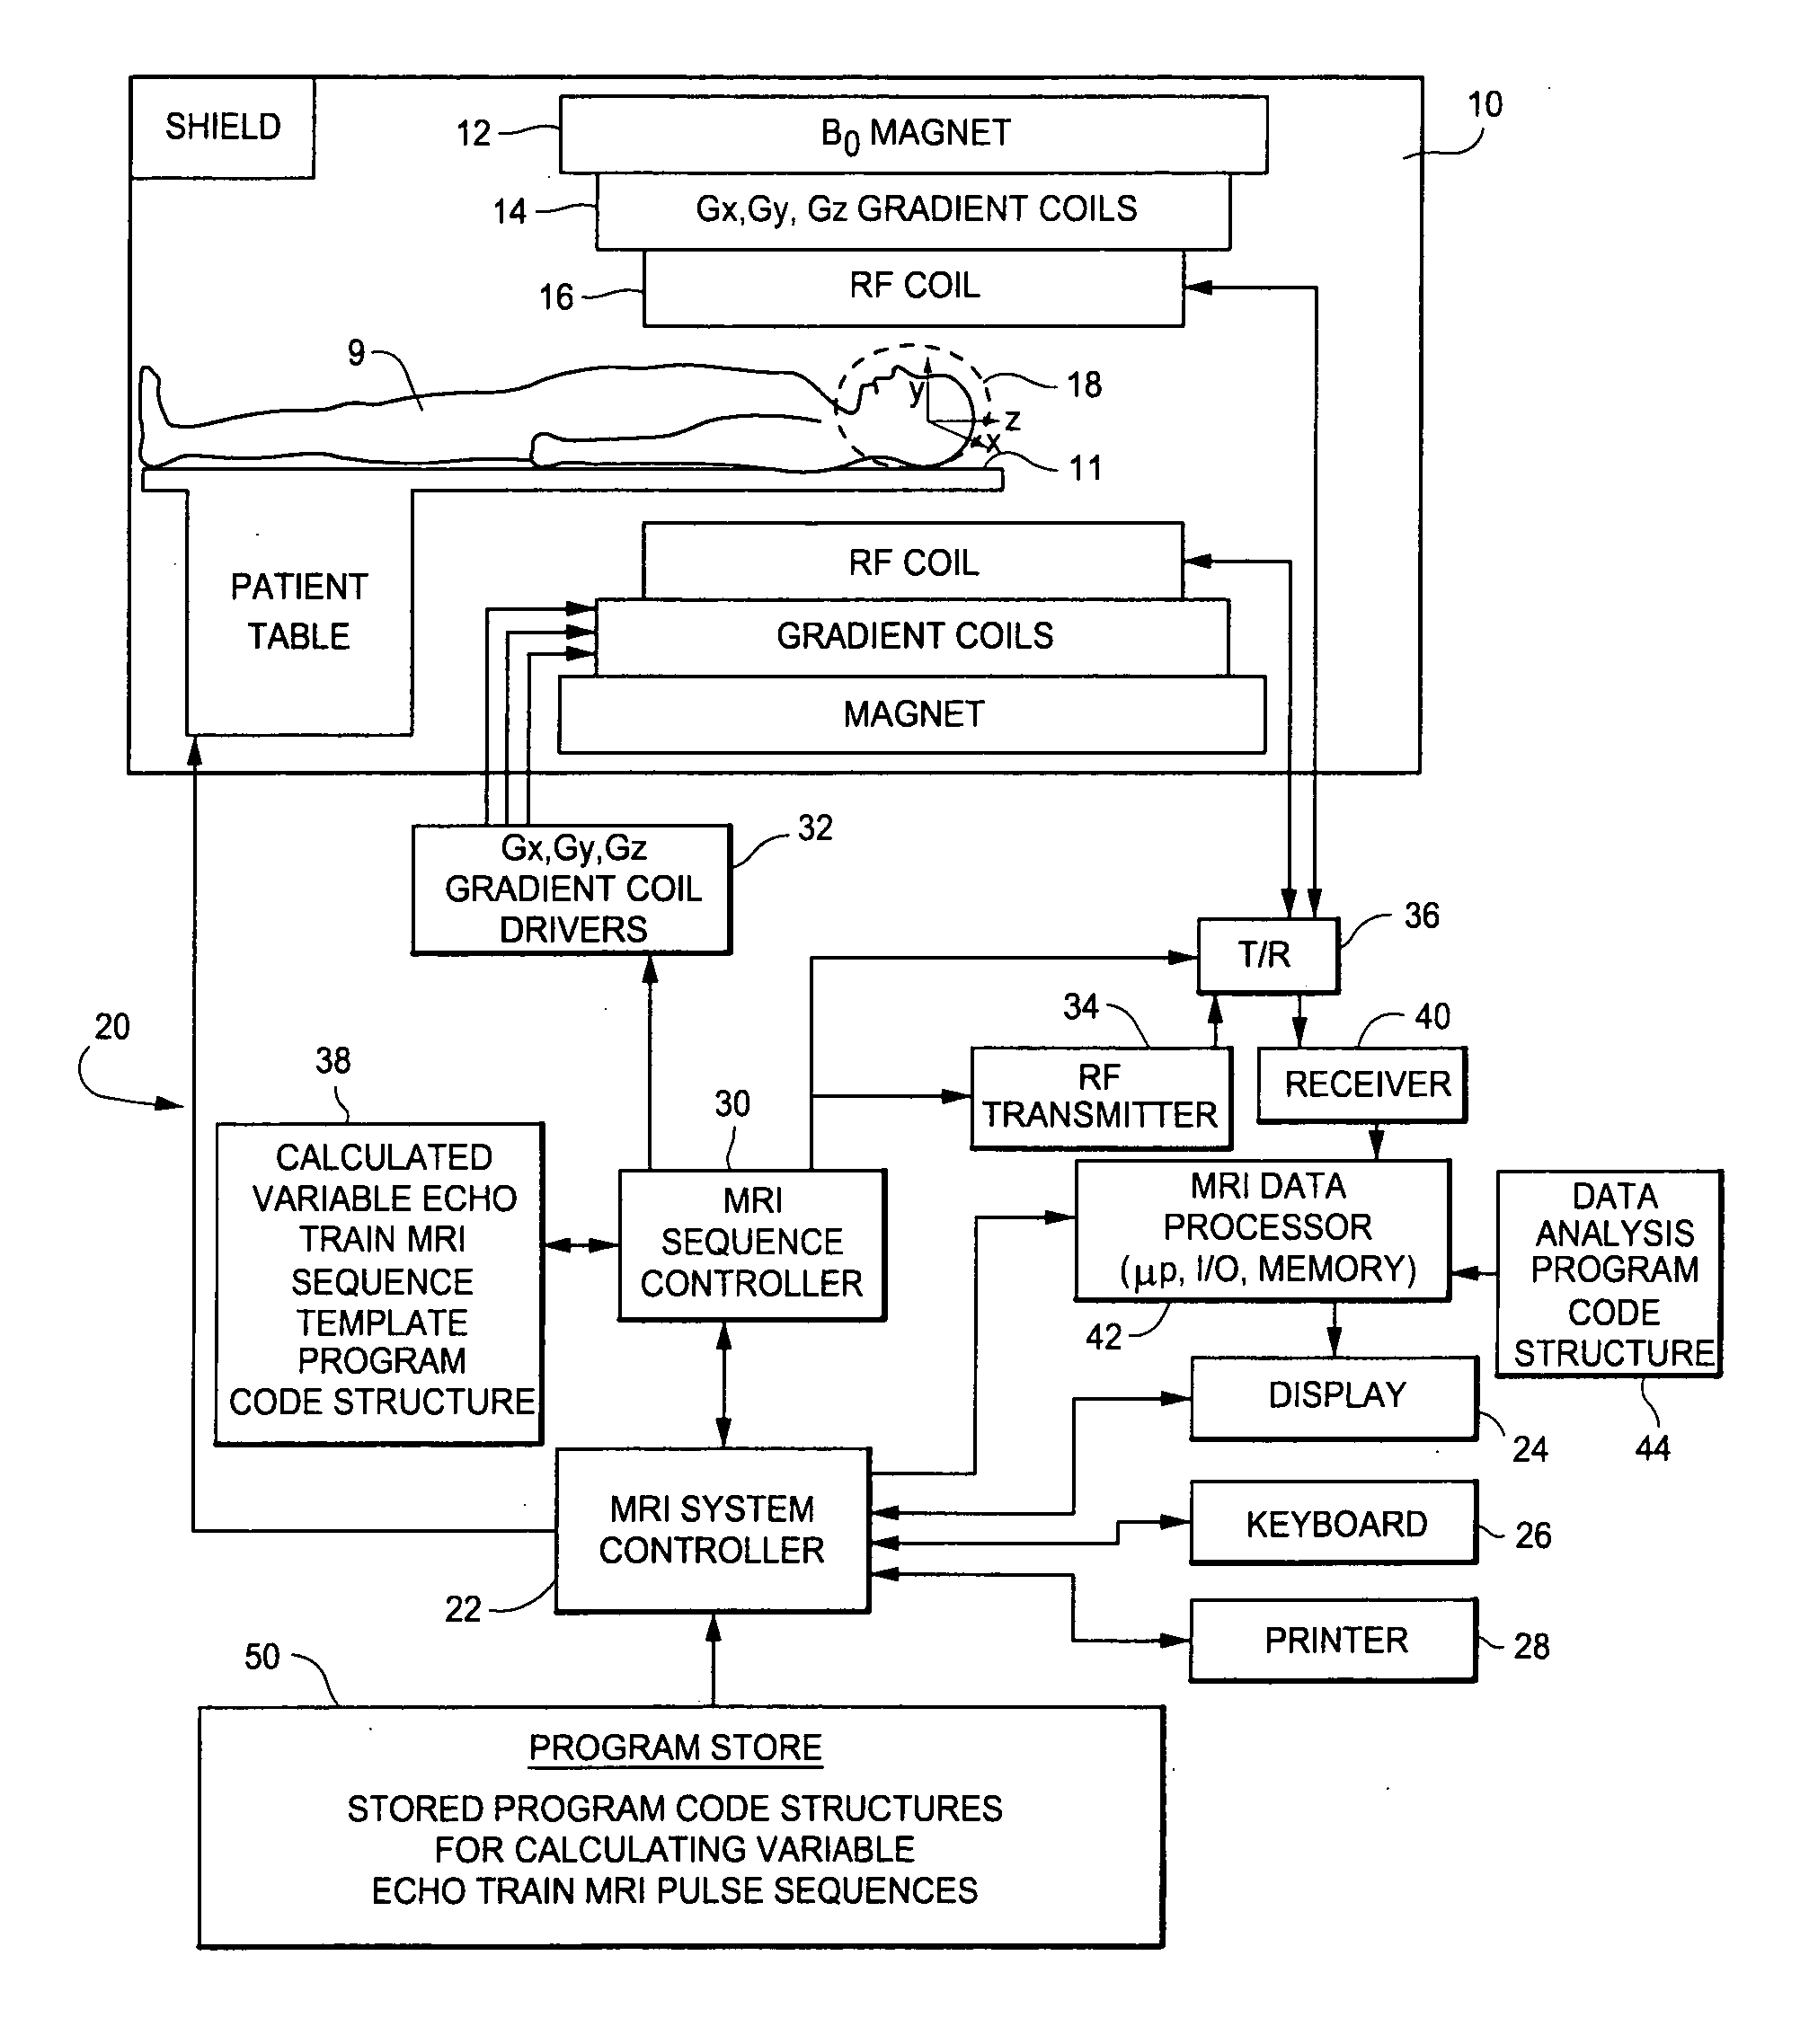 Method and apparatus for designing and/or implementing variable flip angle MRI spin echo train